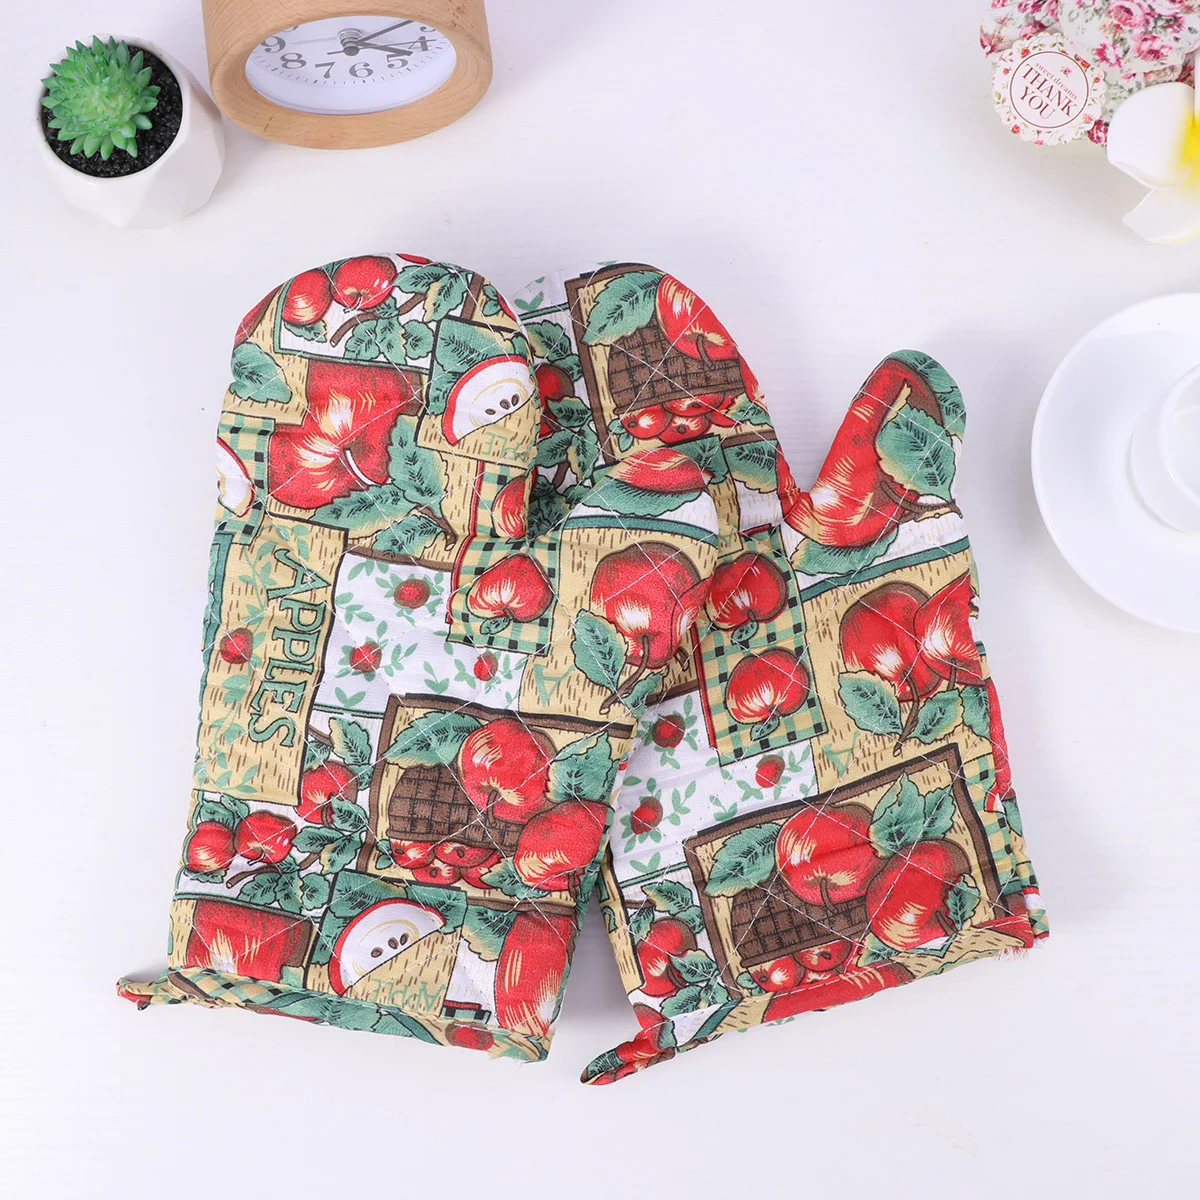 

2Pcs Oven Mitts Apples Pattern Gloves Non-Slip Oven Gloves Hot Pads Potholders Cooking Baking Gloves Kitchen Cooking Baking